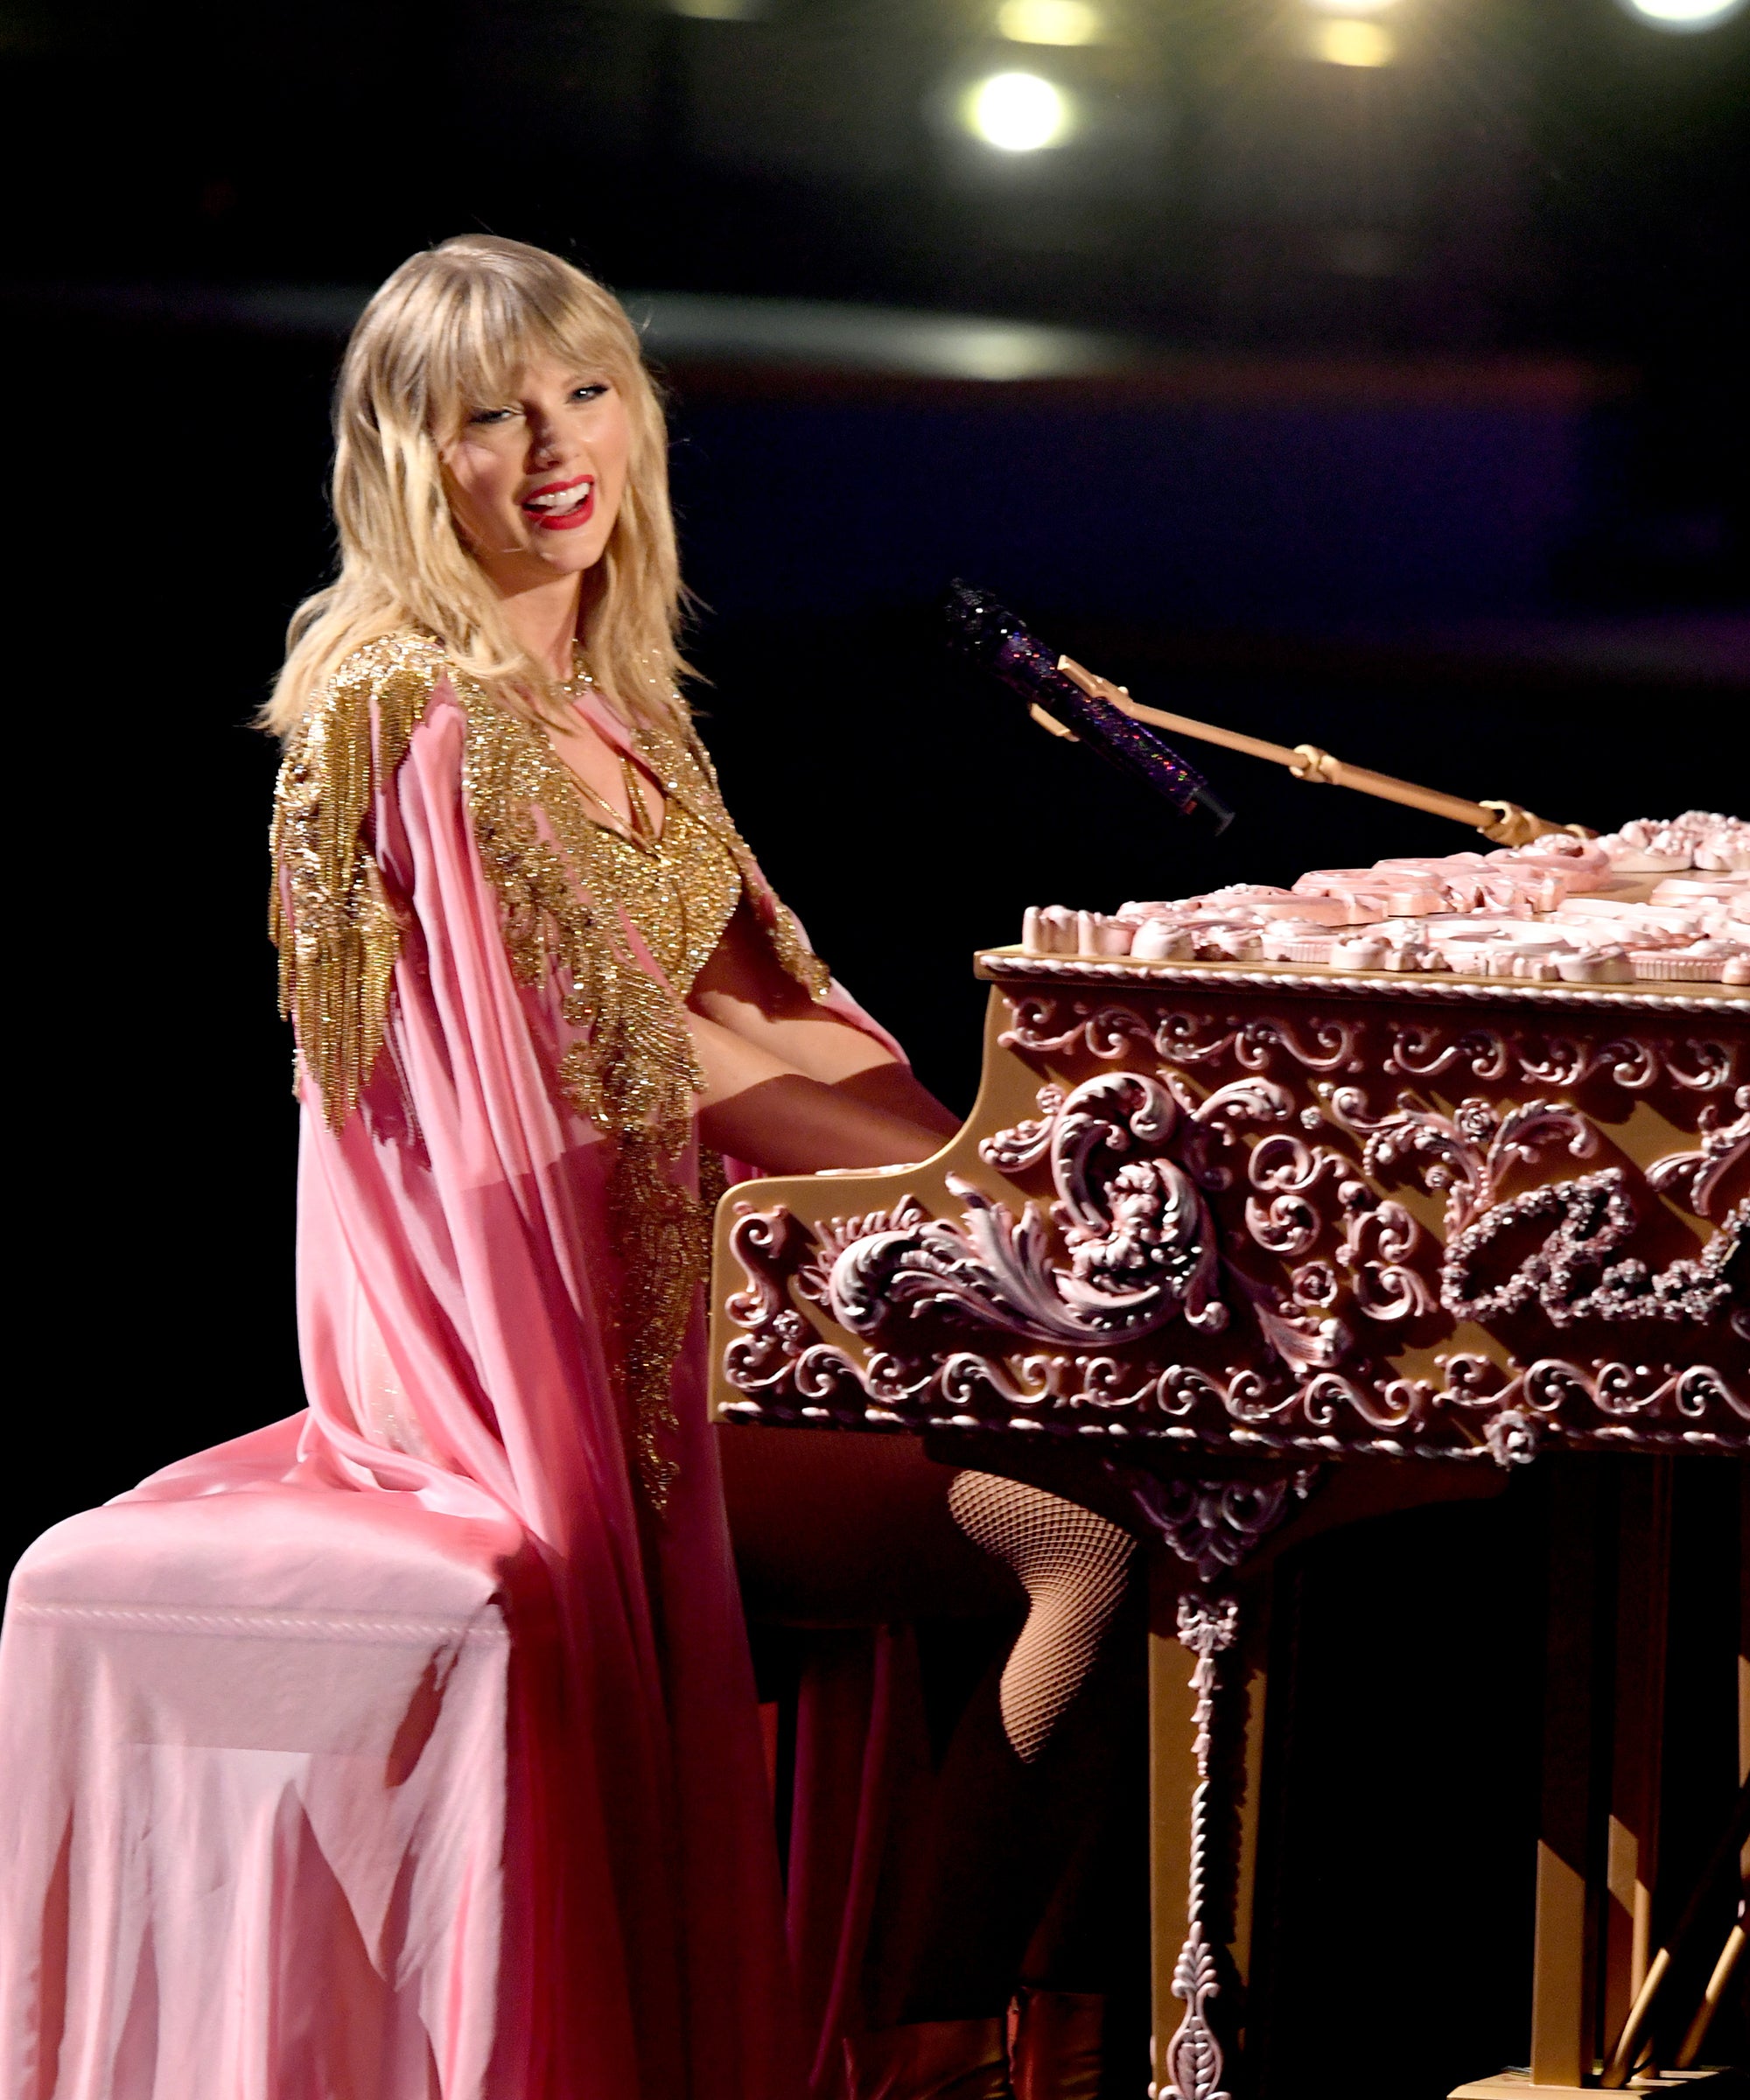 Taylor in a bedazzled pink costume at the piano during a show.